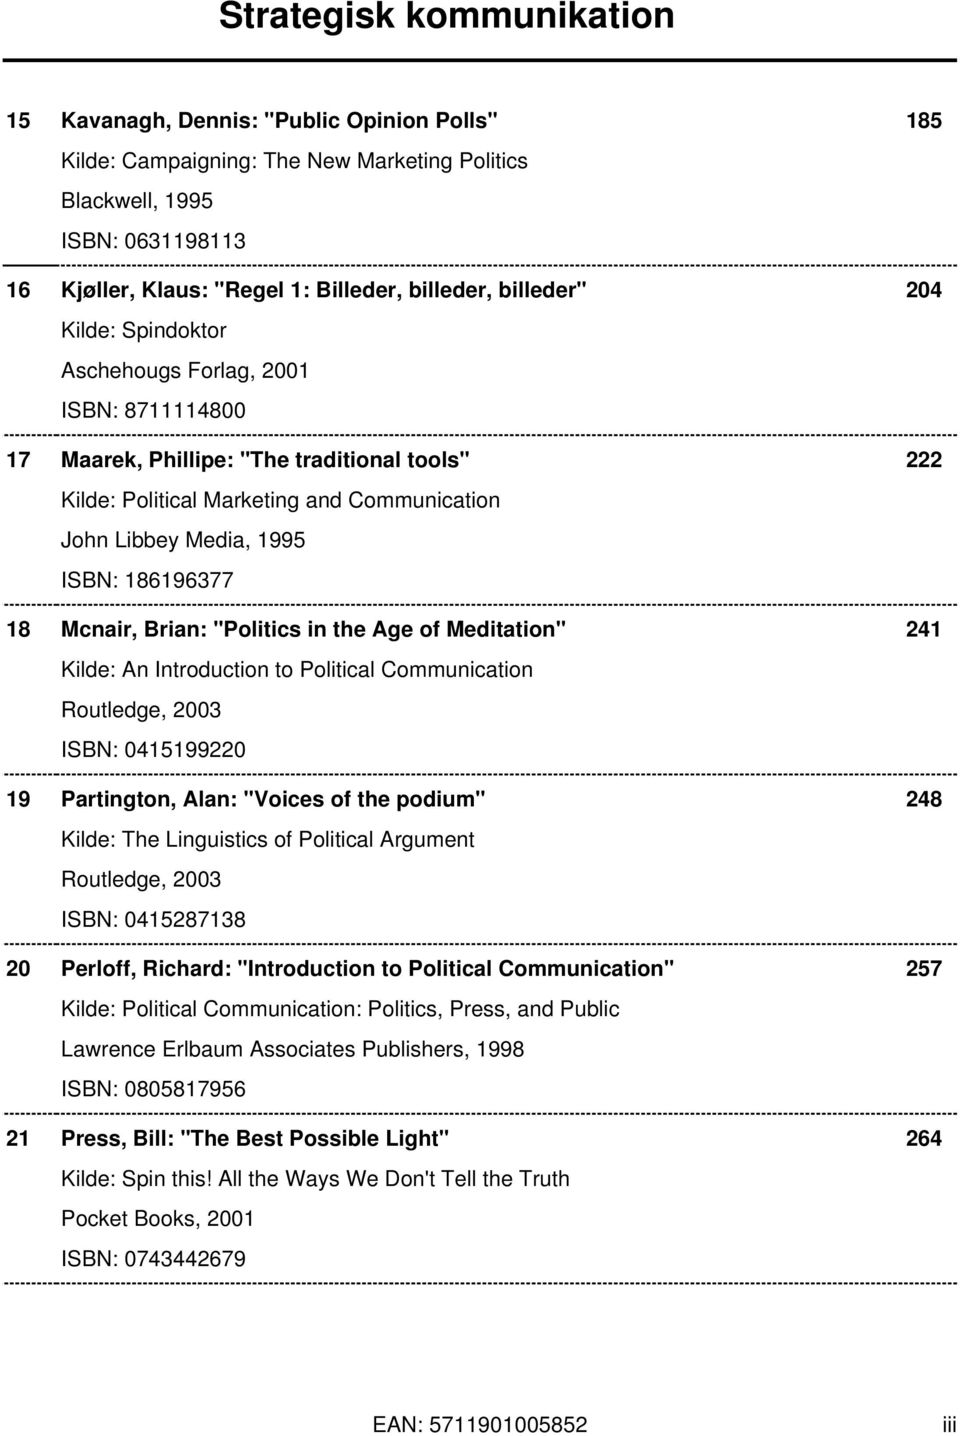 Brian: "Politics in the Age of Meditation" 241 Kilde: An Introduction to Political Communication Routledge, 2003 ISBN: 0415199220 19 Partington, Alan: "Voices of the podium" 248 Kilde: The